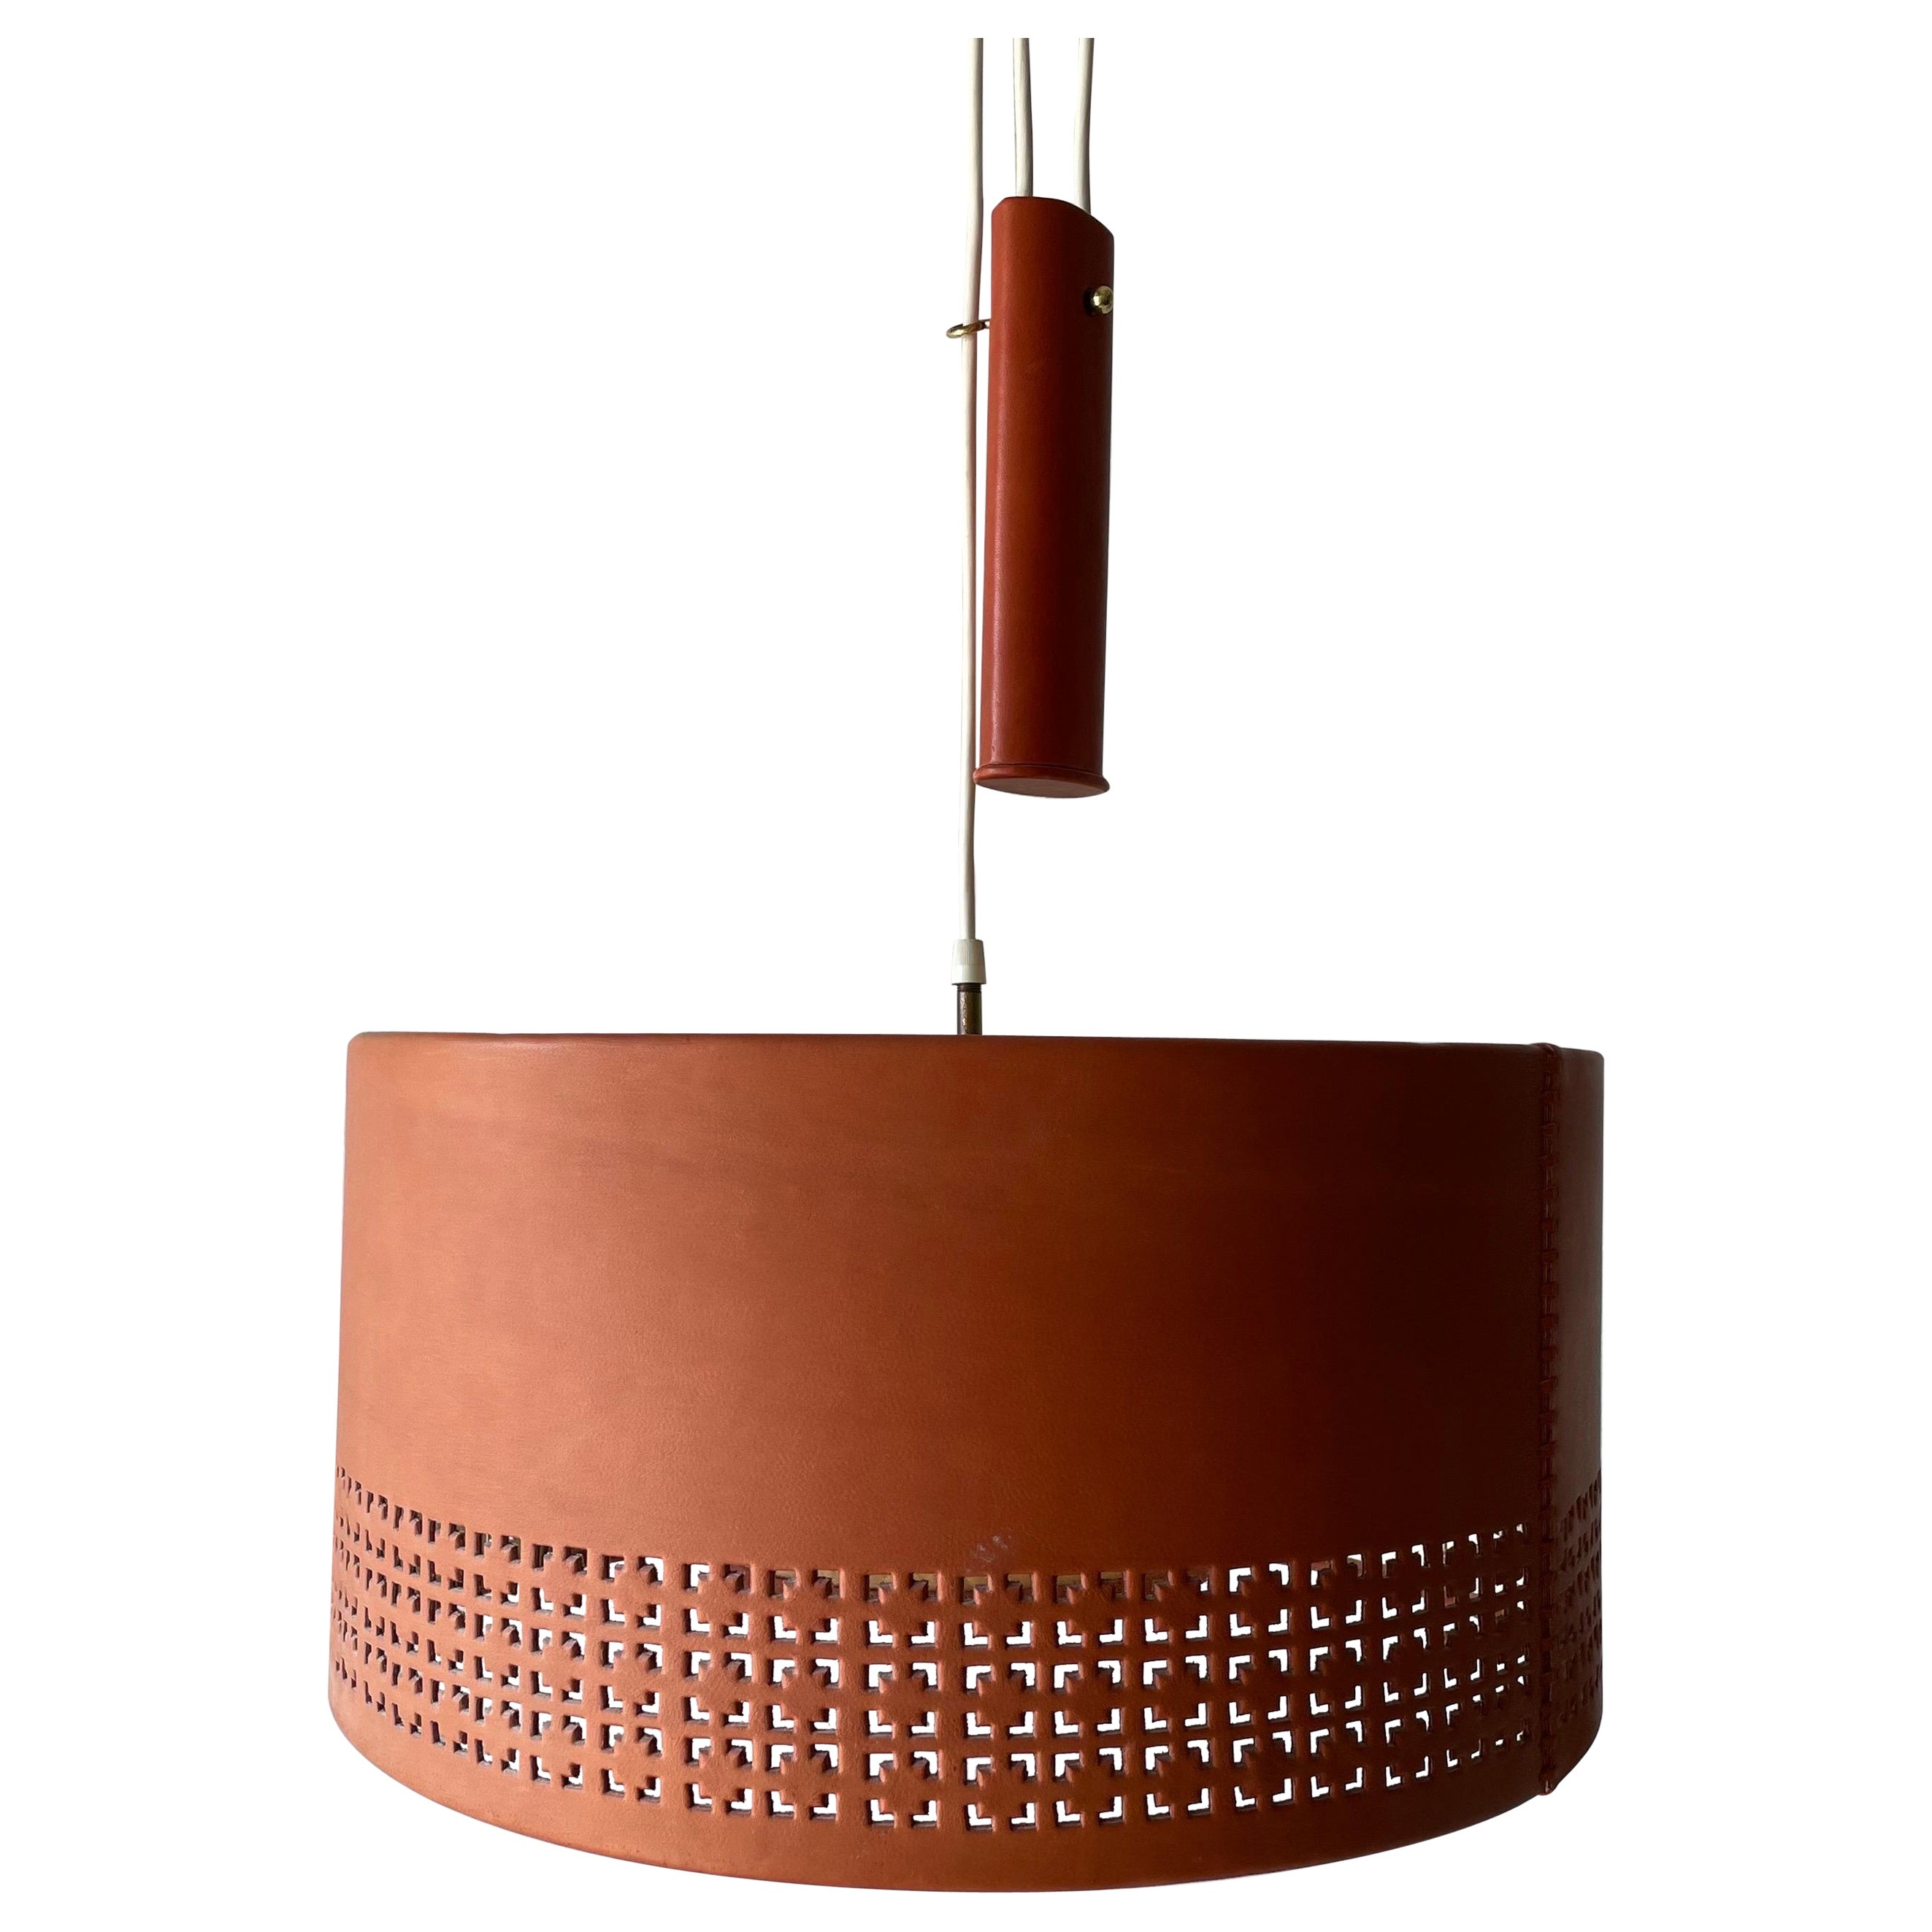 Cylindrical Leather Shade with Motifs Counterweight Pendant Lamp, 1960s, Germany